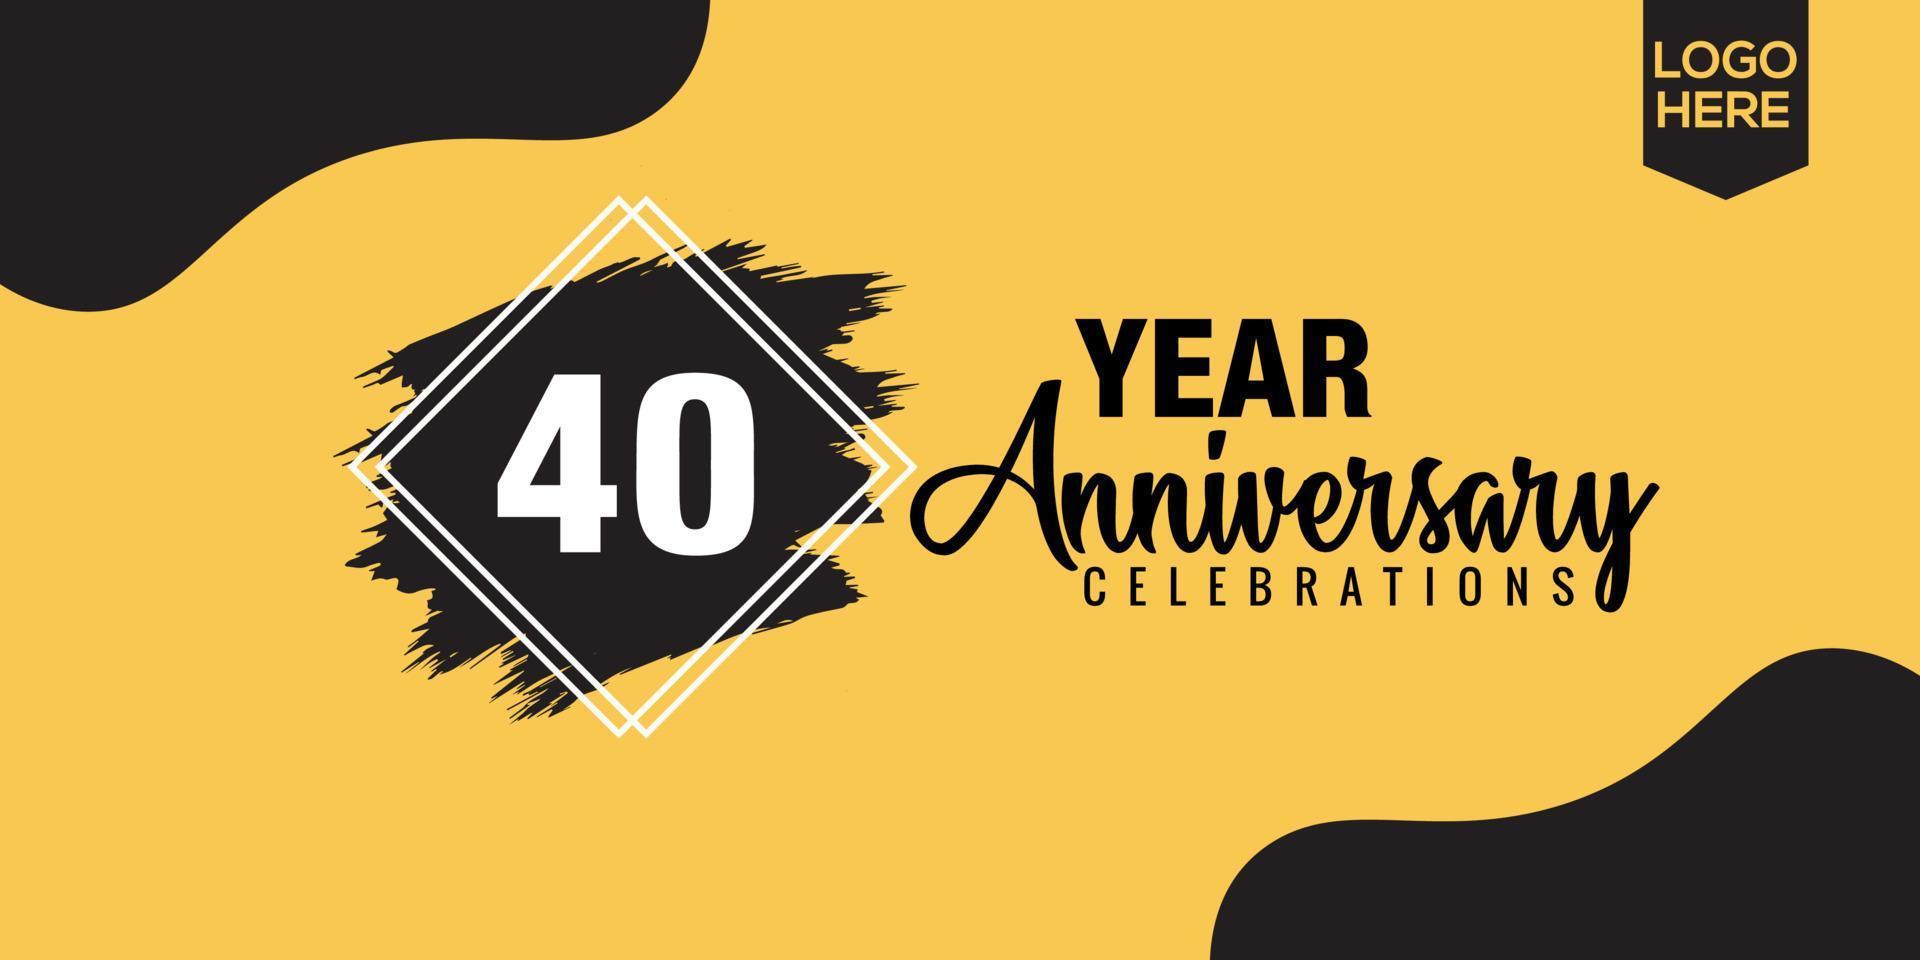 40th years anniversary celebration logo design with black brush and yellow color with black abstract vector illustration